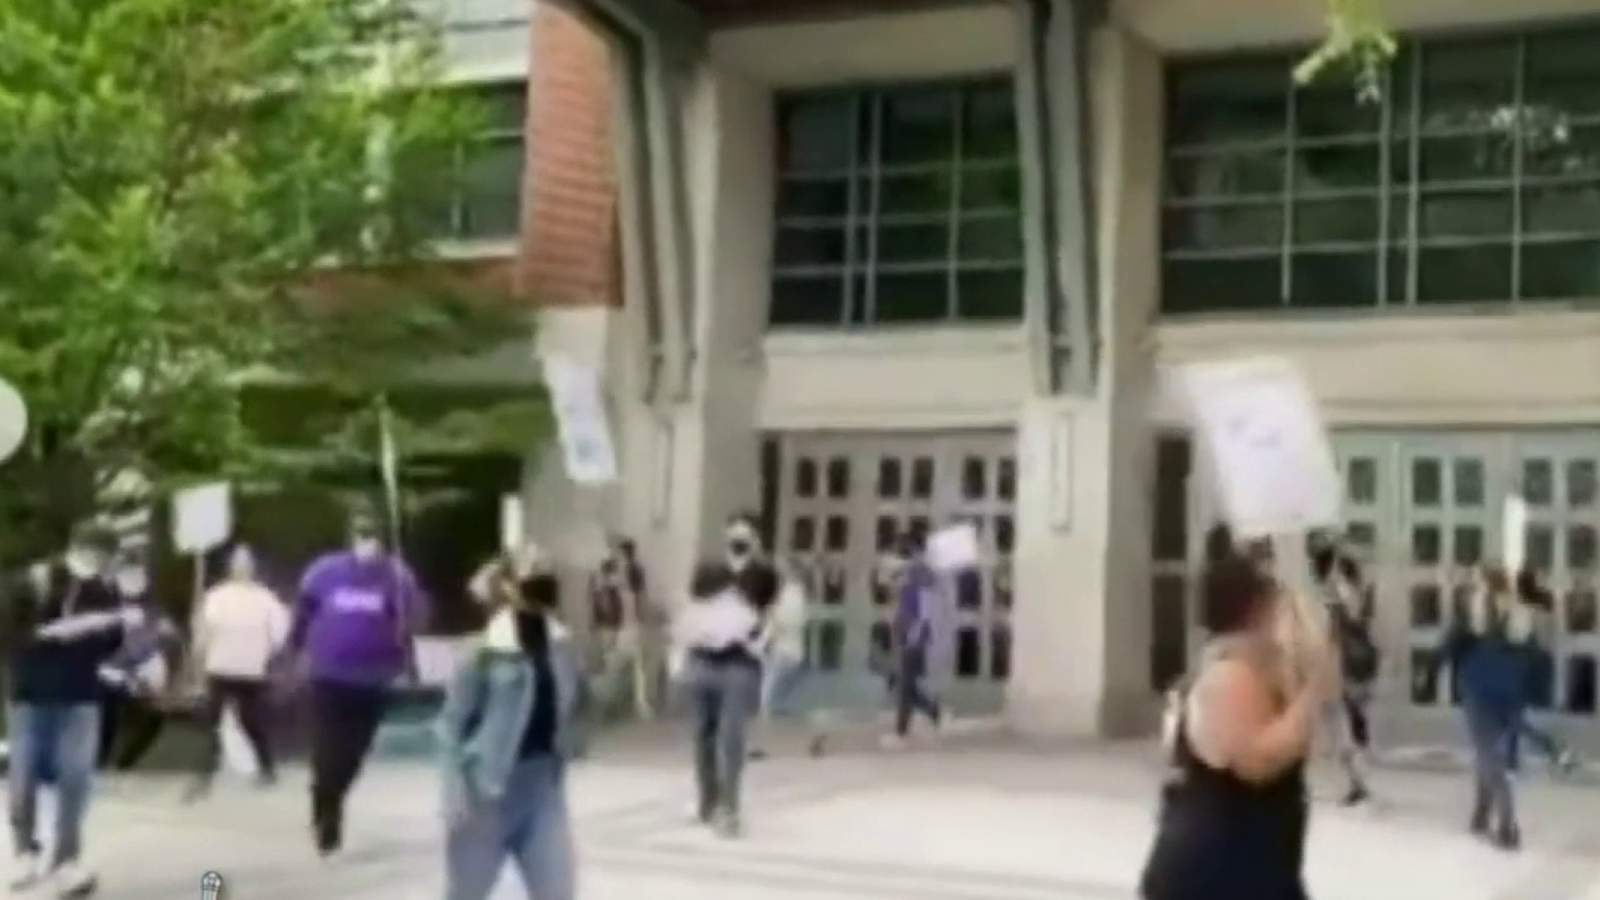 Graduate students: Strike at University of Michigan will continue until demands are met